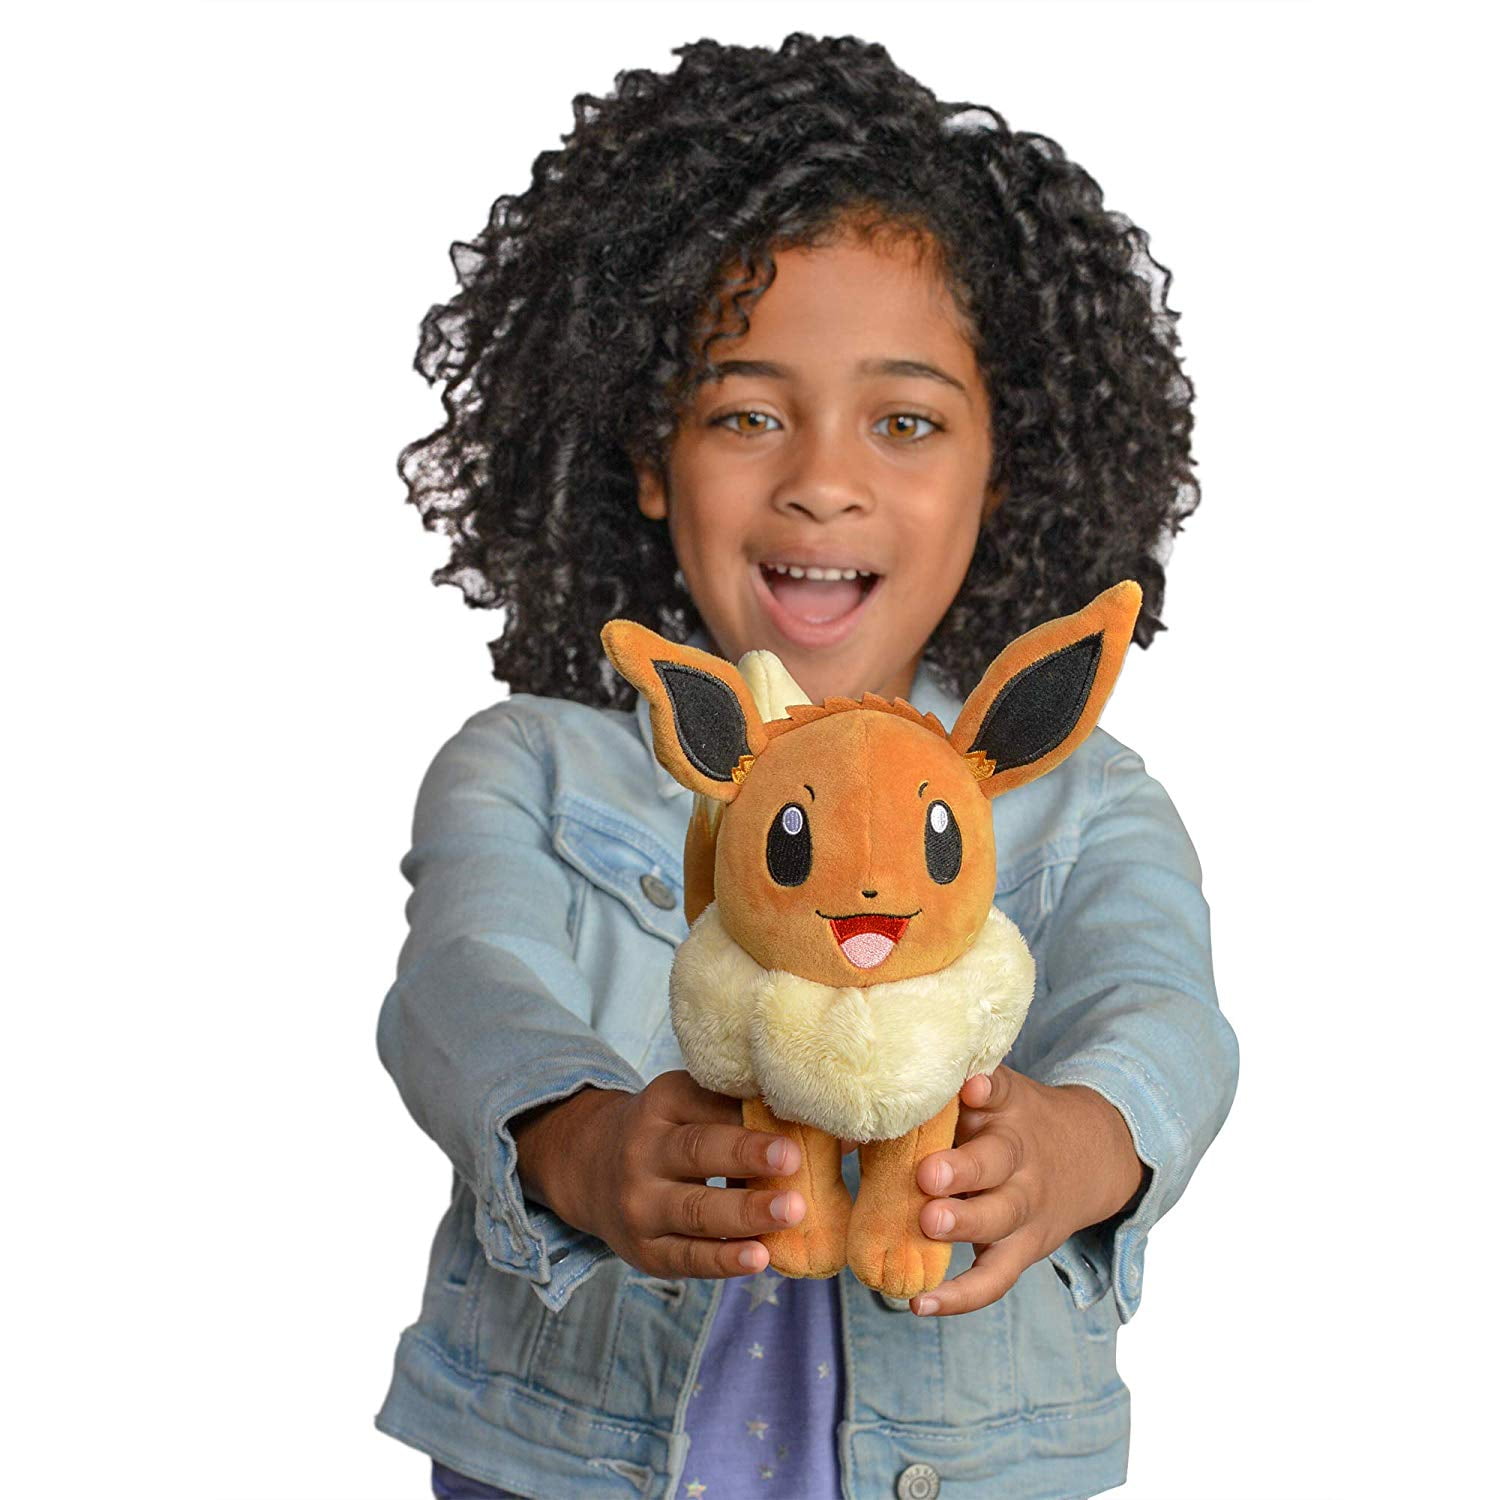  Pokemon 8 Eevee & Sylveon Plush Stuffed Animal Toys, 2-Pack - Eevee  Evolution - Officially Licensed - Gift for Kids - 2+ : Toys & Games